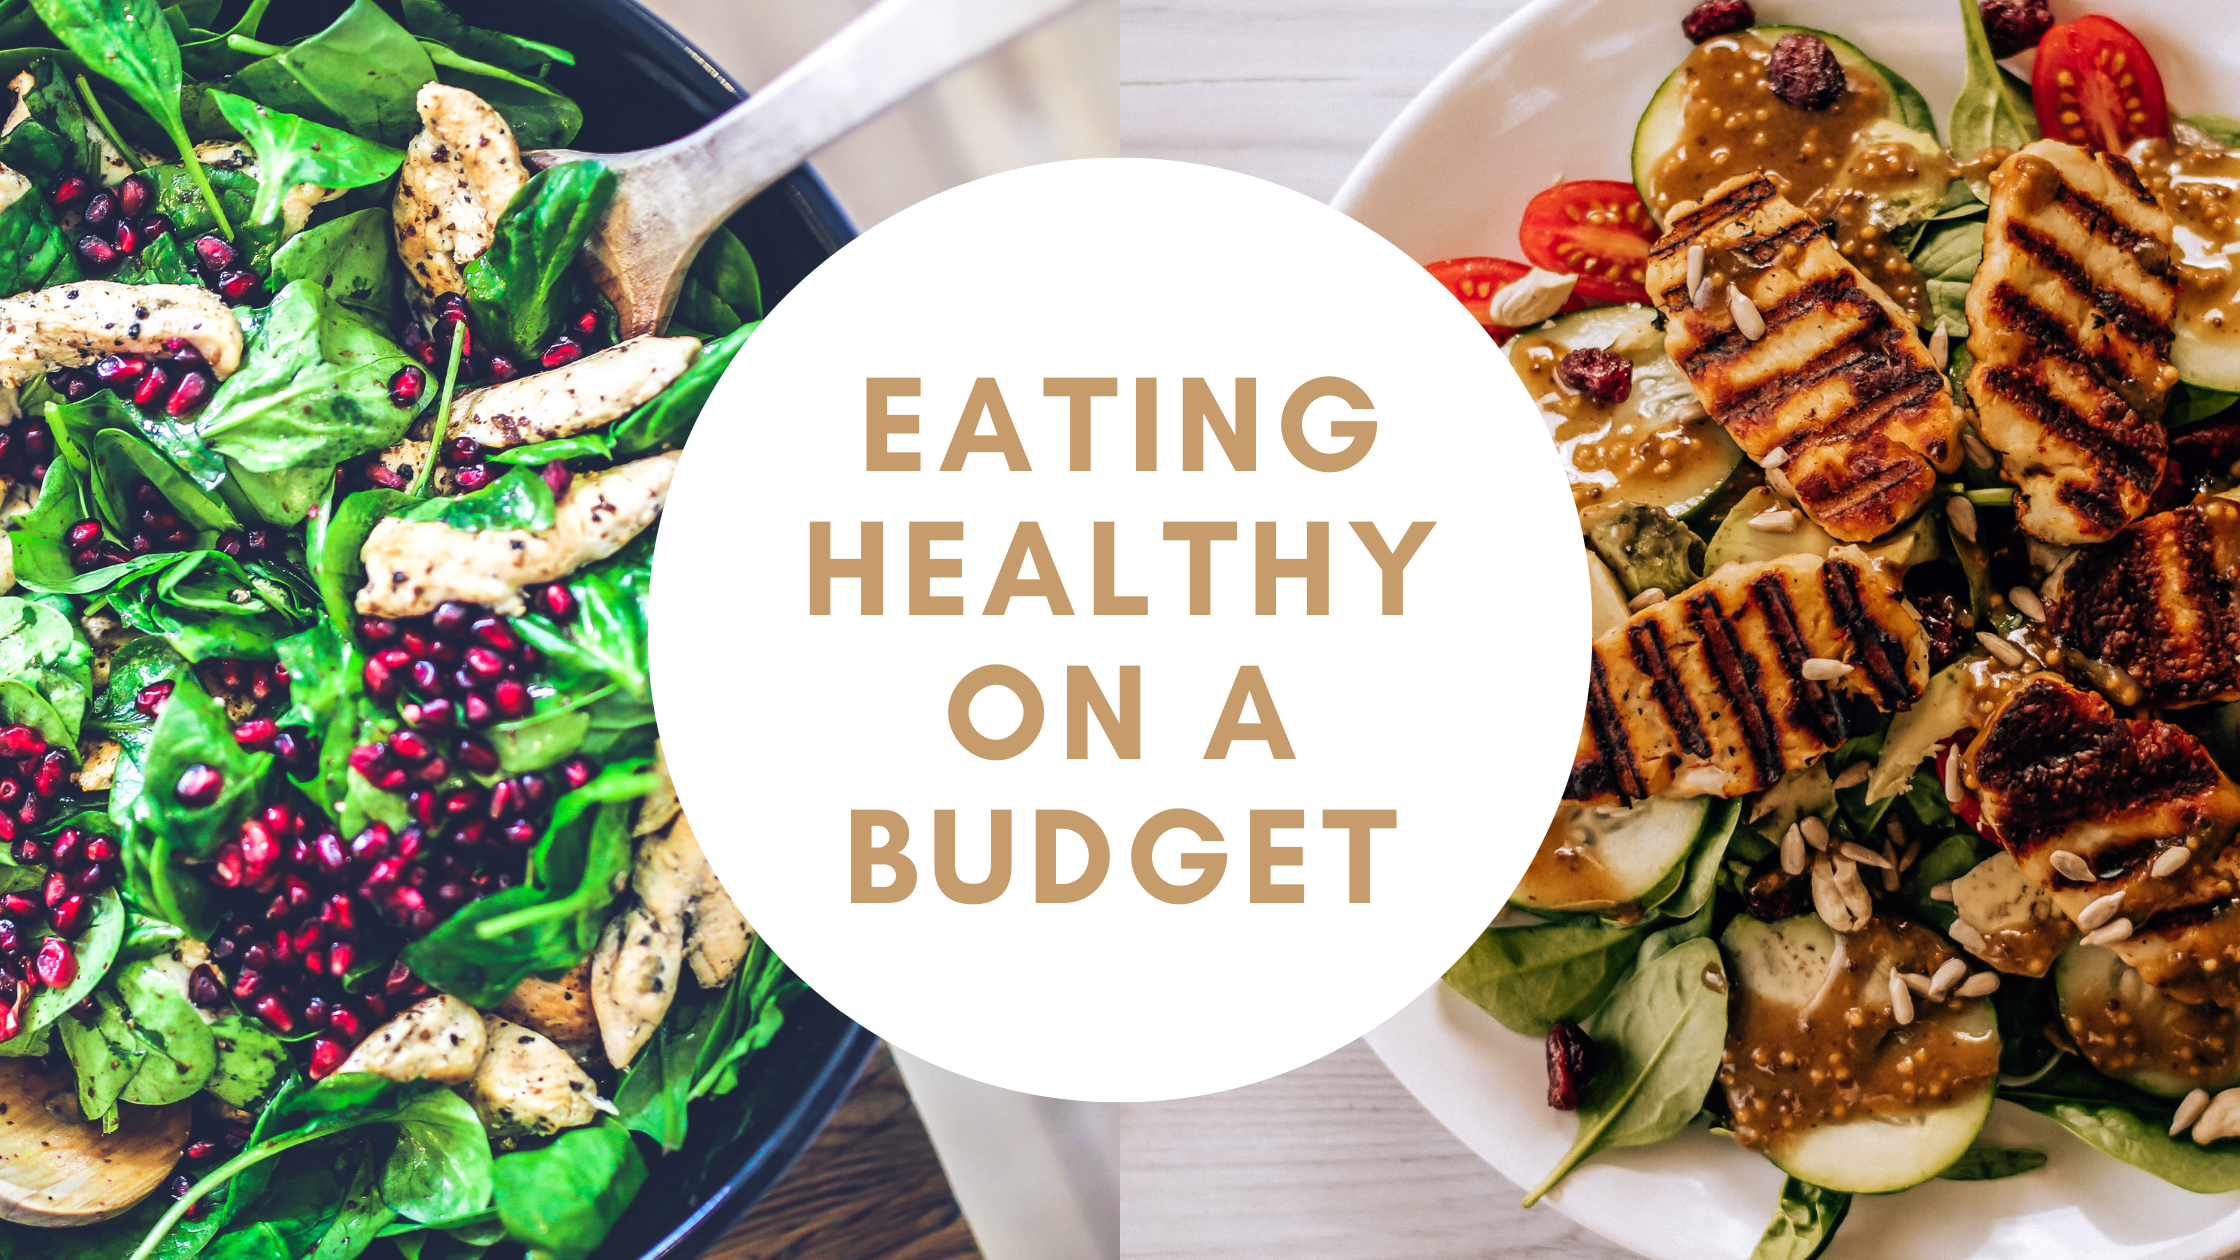 8 Tips for Eating Healthy on a Budget